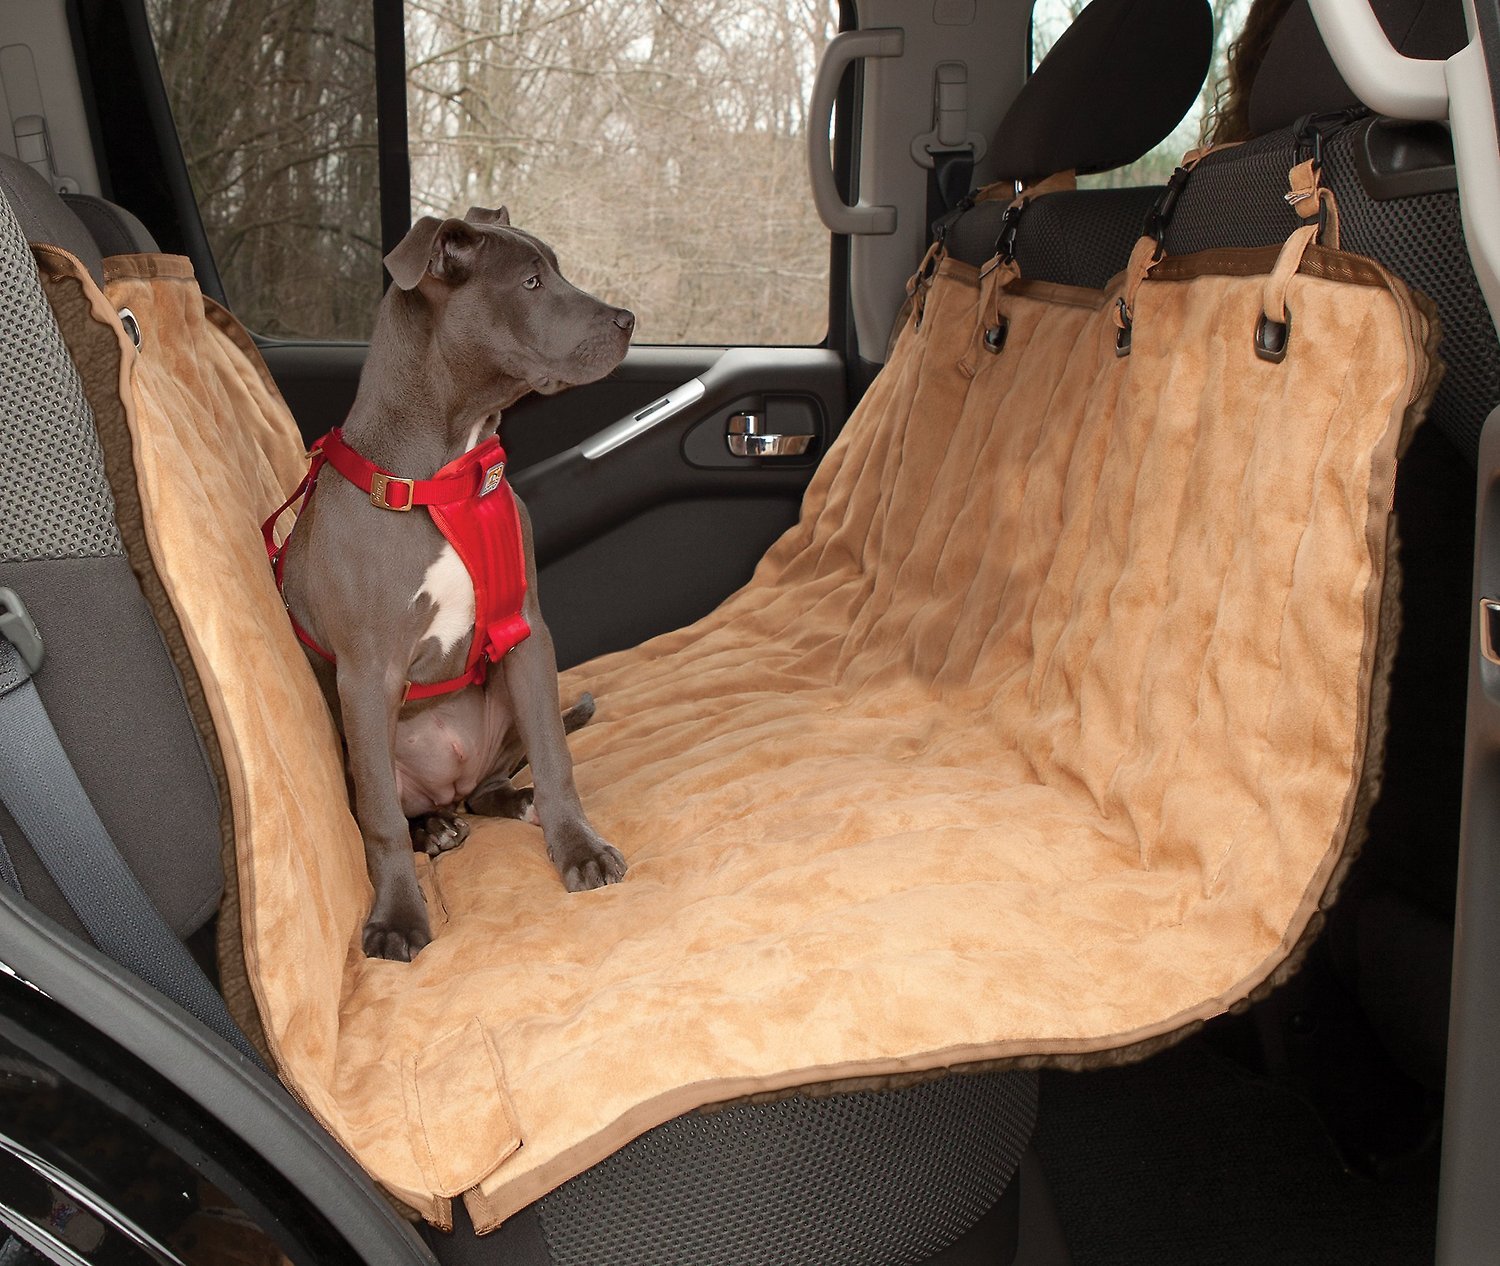 Use a passenger seat hammock to provide your dog with a comfortable spot in the back seat.